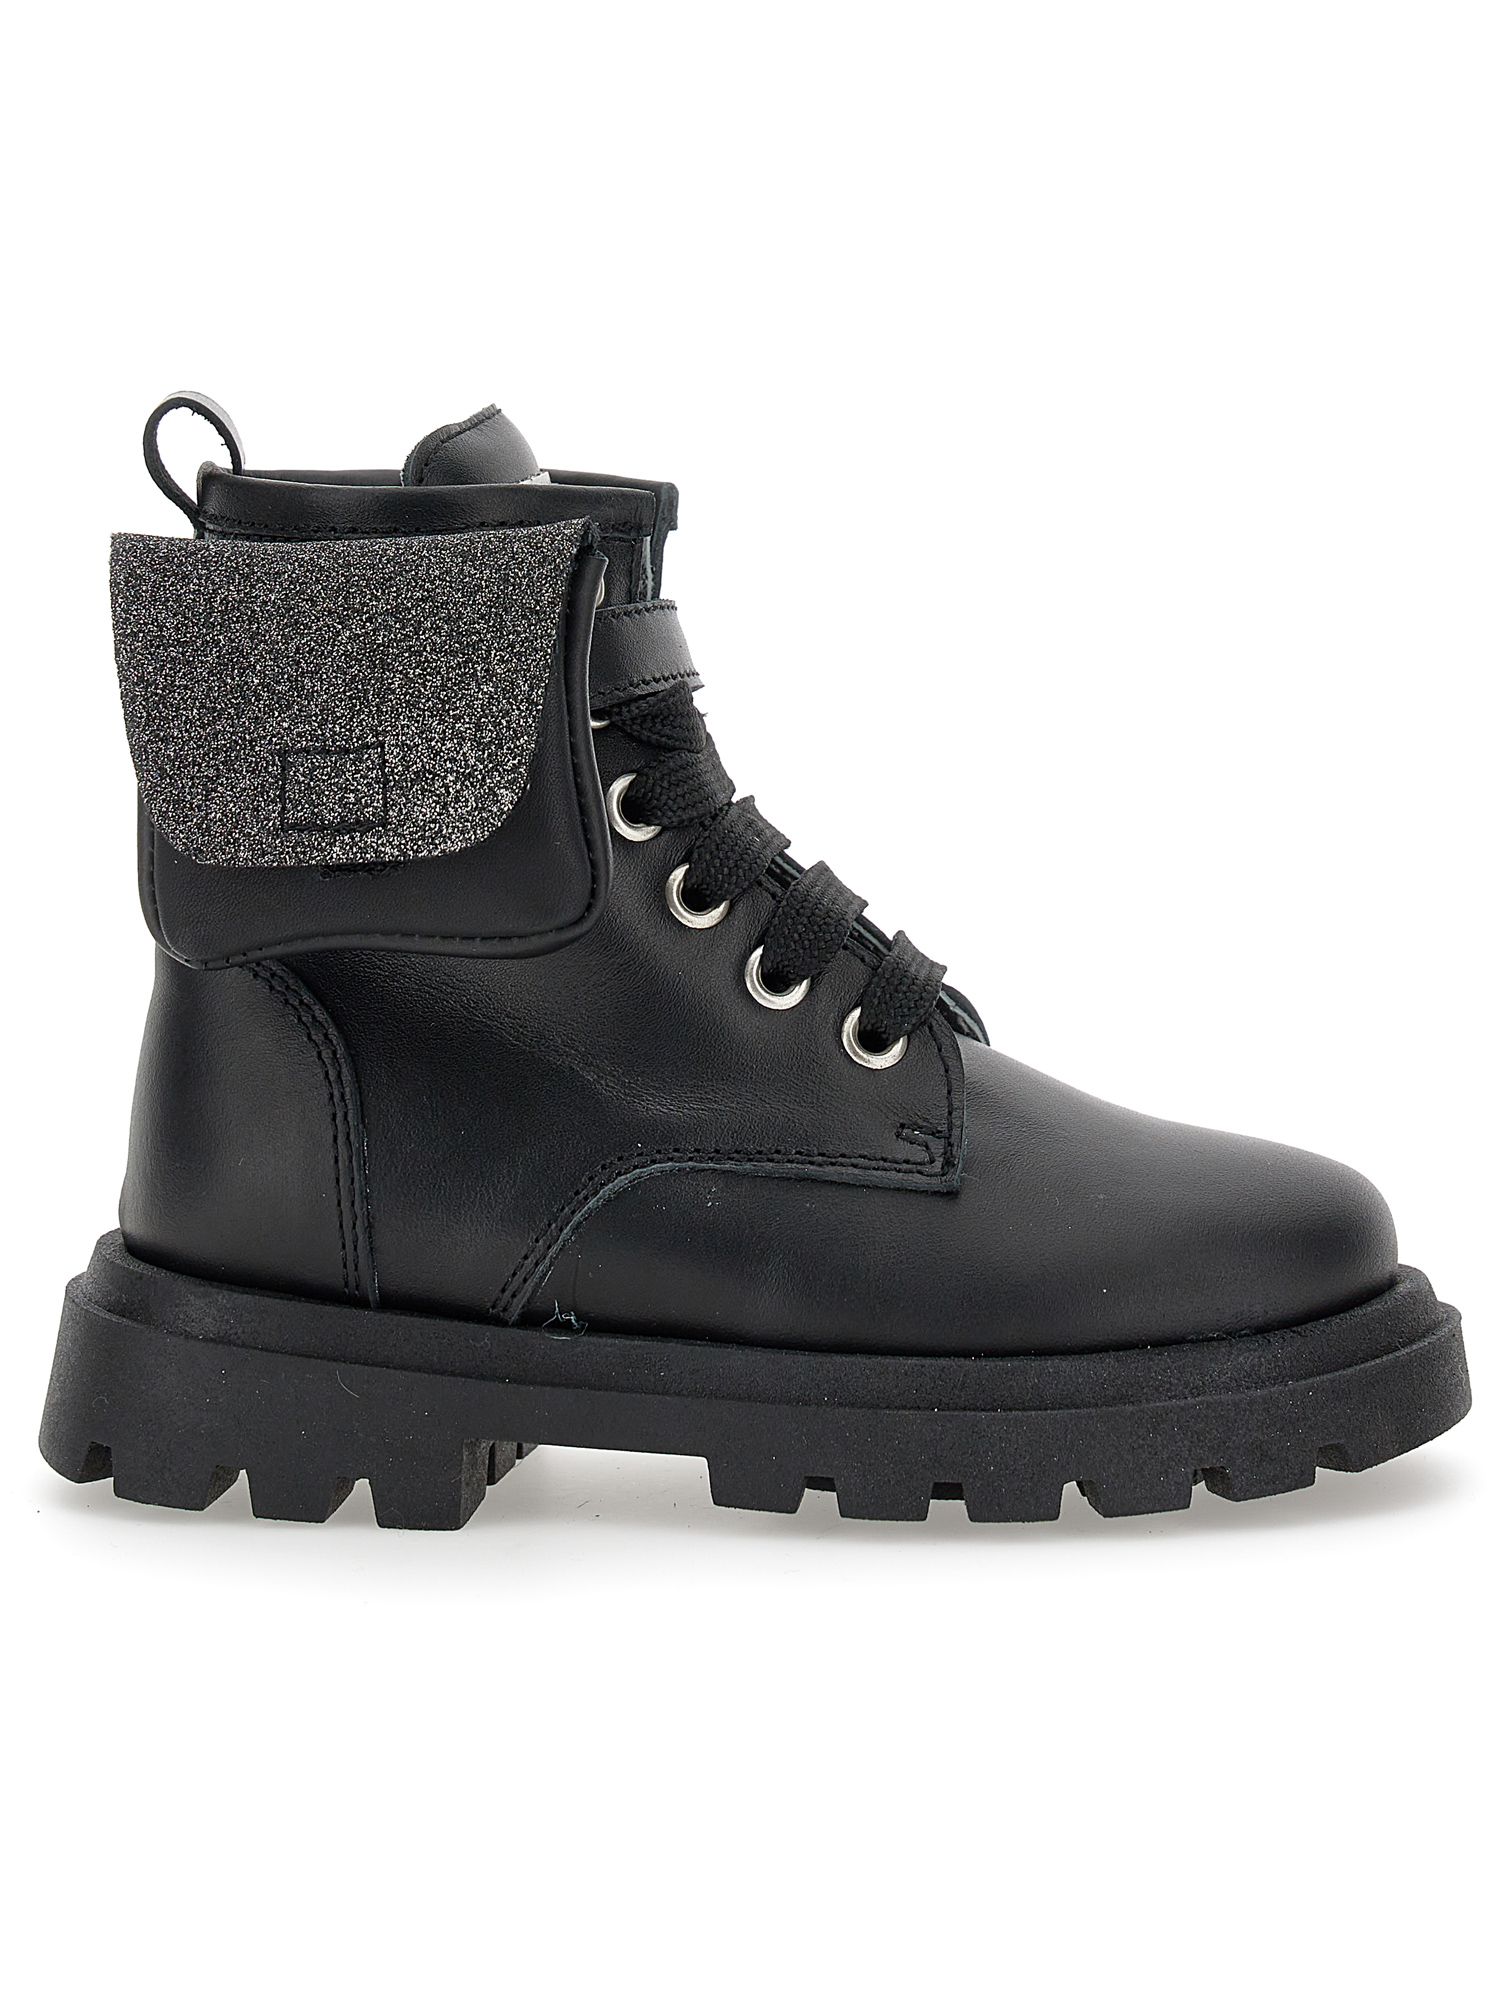 Monnalisa Leather Boots With Pocket In Black